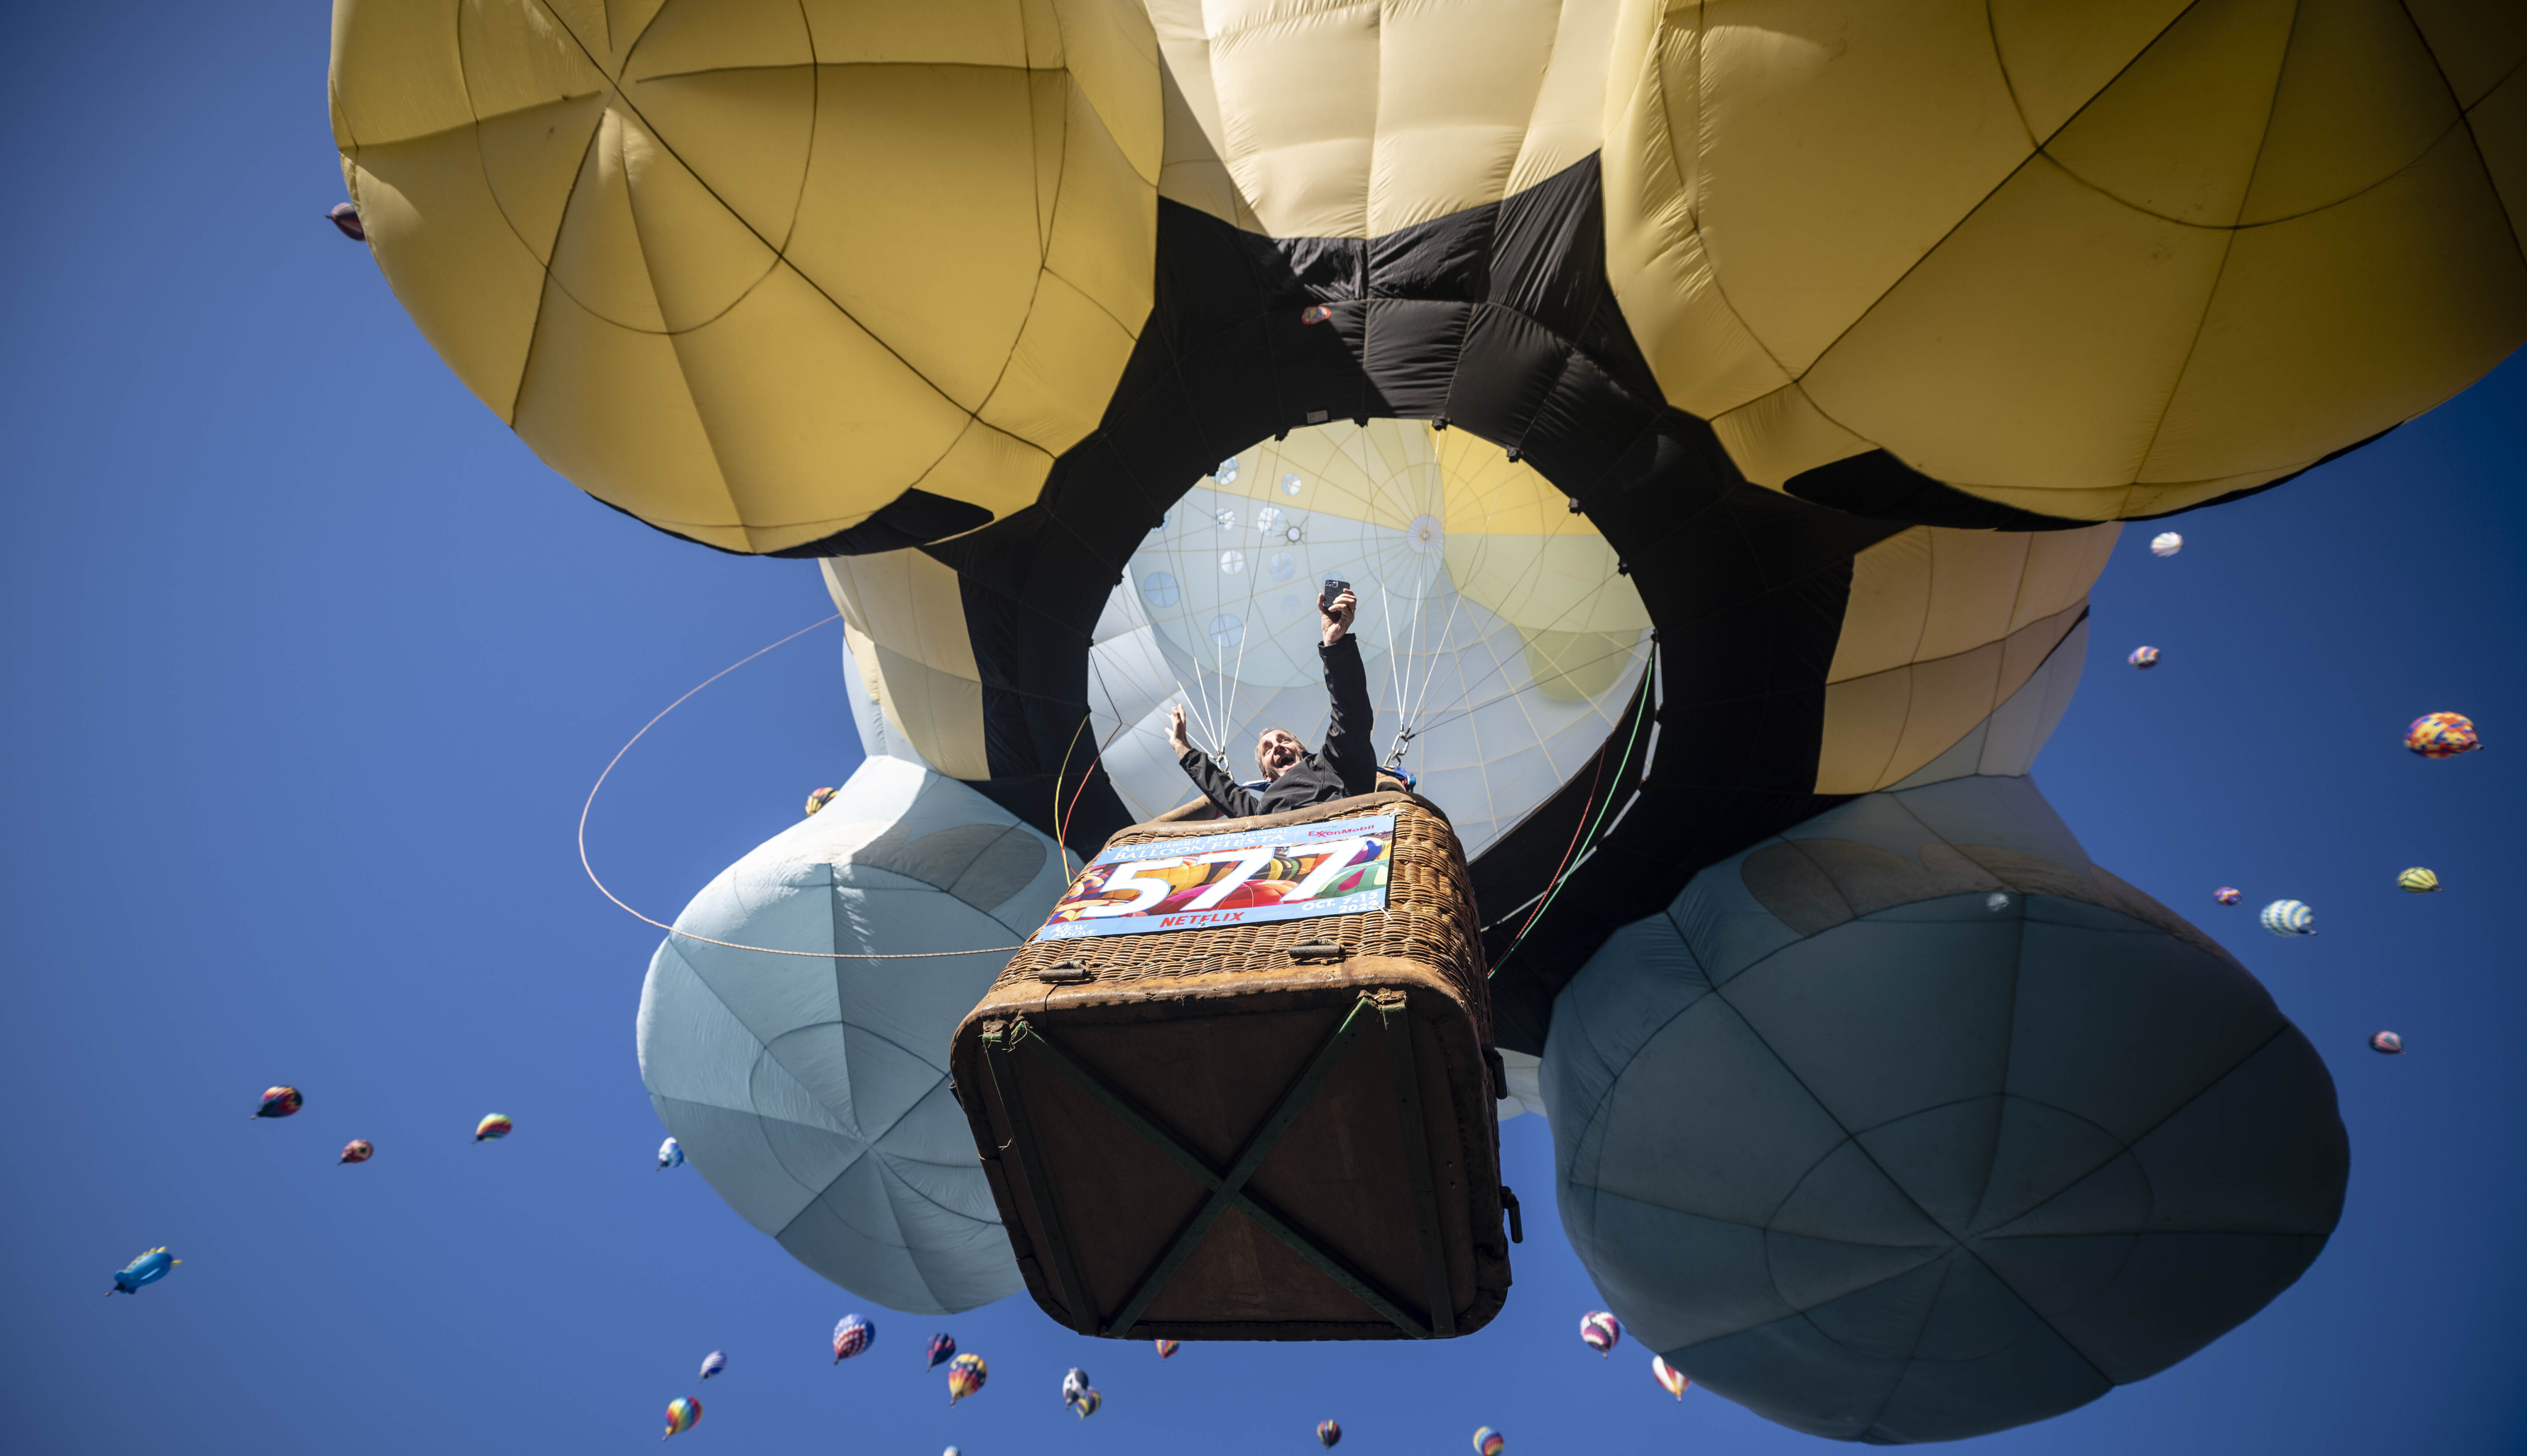 Pilot Pilip Audenaert, of Brazil, rejoices as he takes off during the mass accession at the Albuquerque International Balloon Fiesta, Saturday, Oct. 7, 2023, in Albuquerque, N.M. (AP Photo/Roberto E. Rosales)